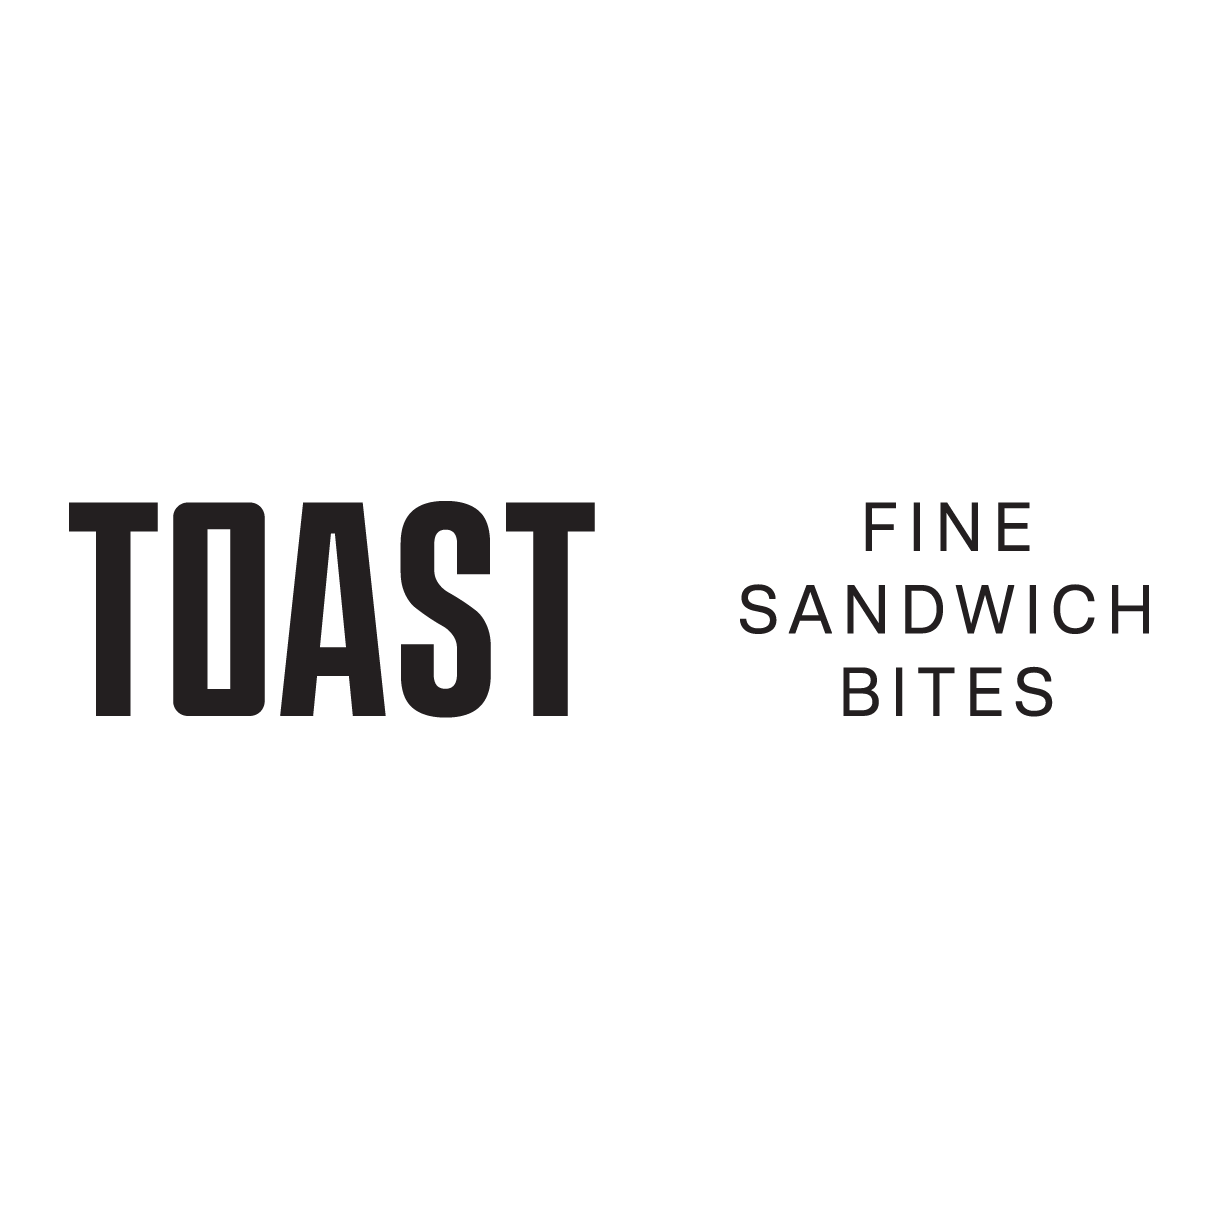 Food and Beverage Toast Social T Social Media Marketing Agency Digital Strategy Services Canada.png